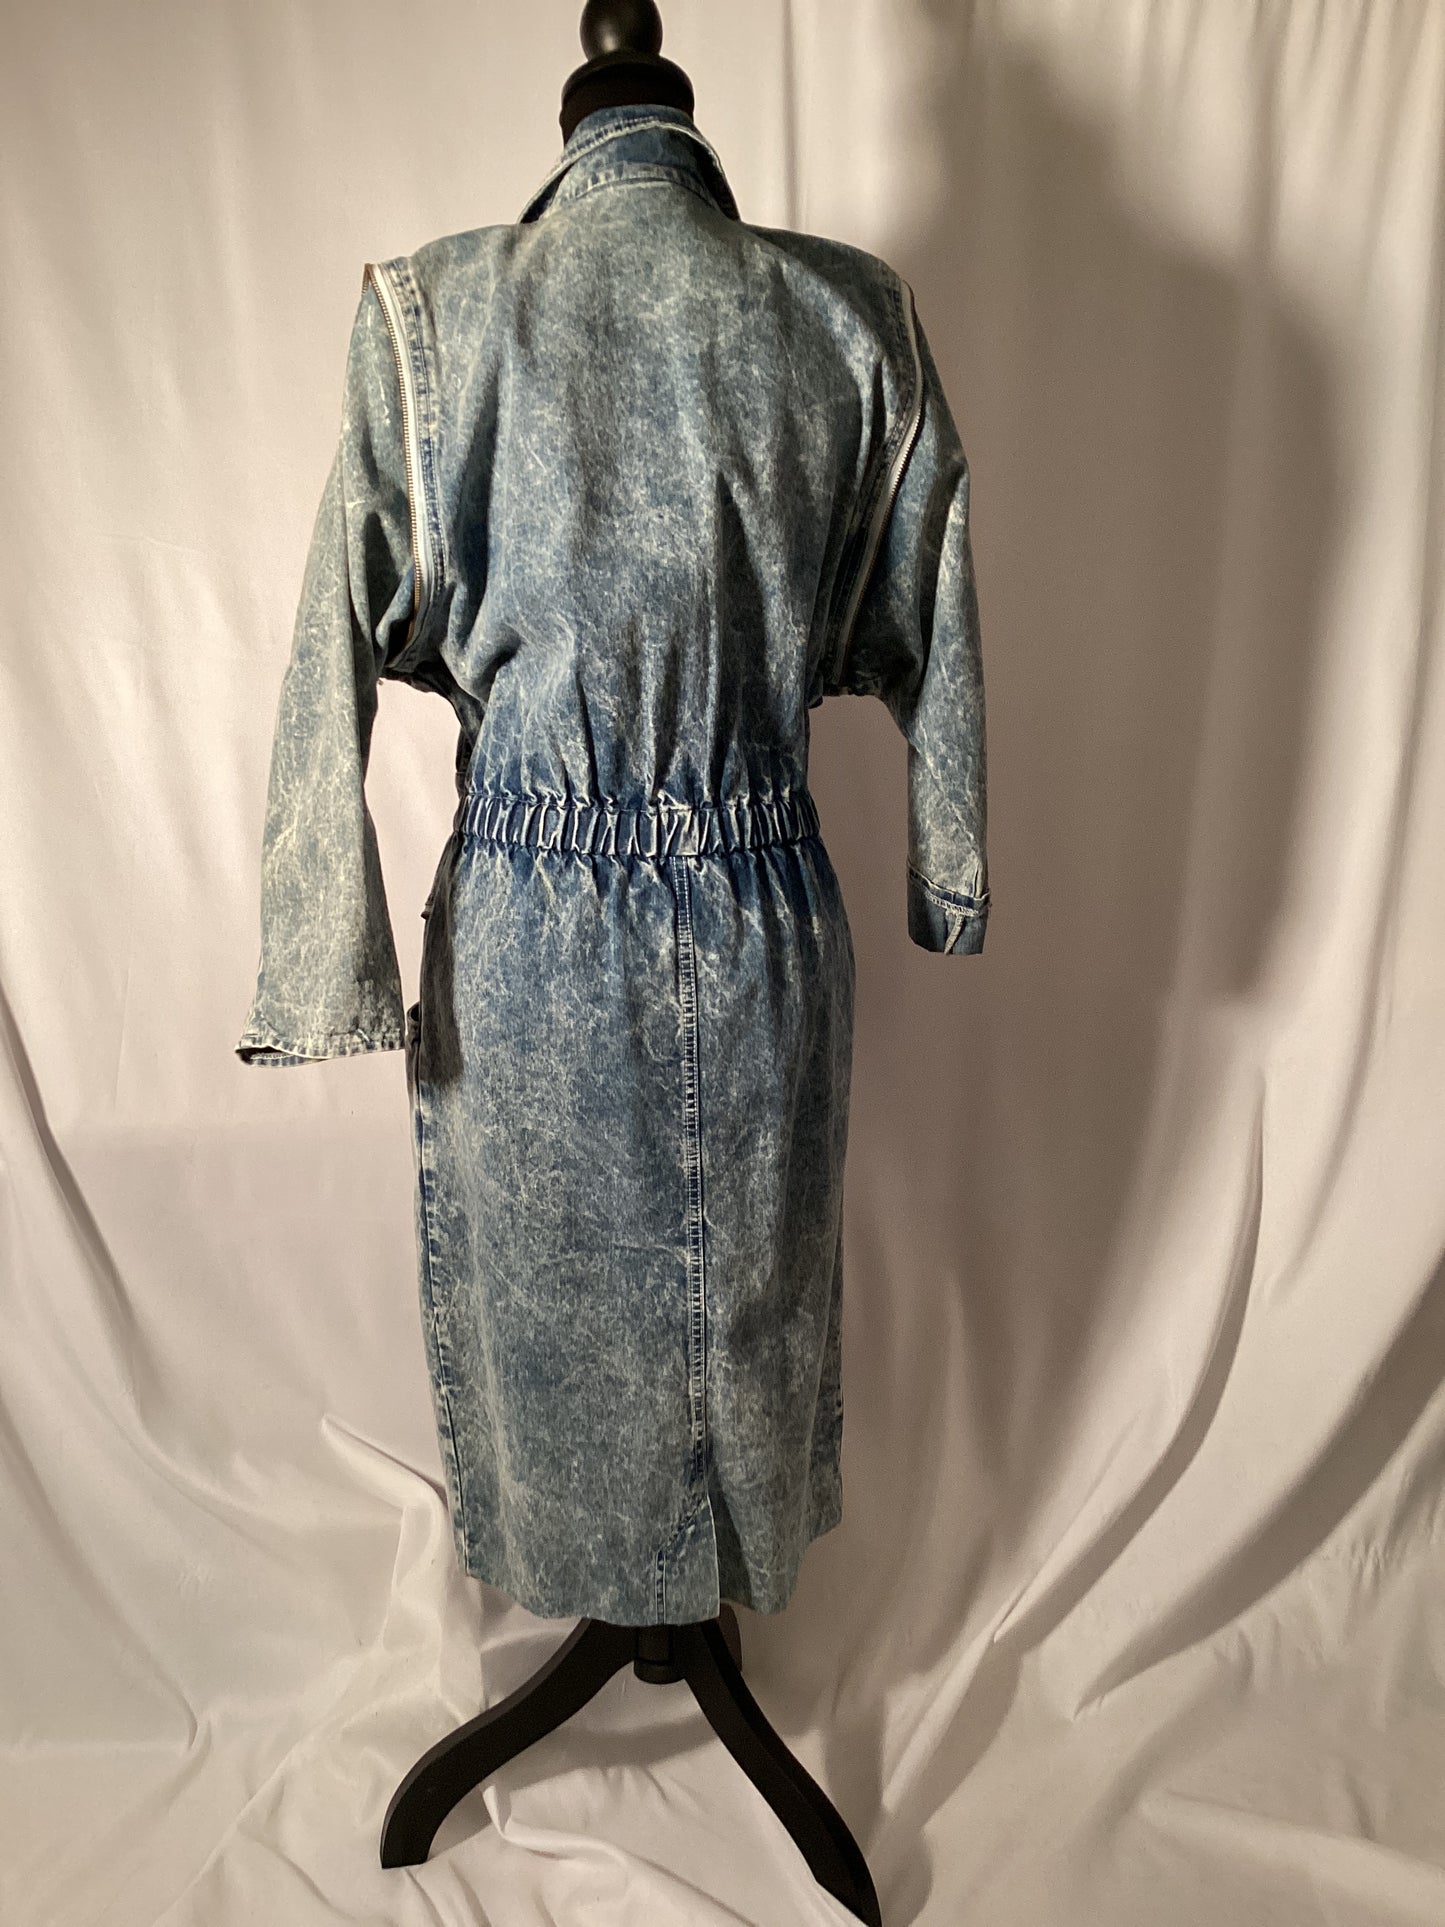 Front Button  Acid washed Denim Dress by Coloursport, size small